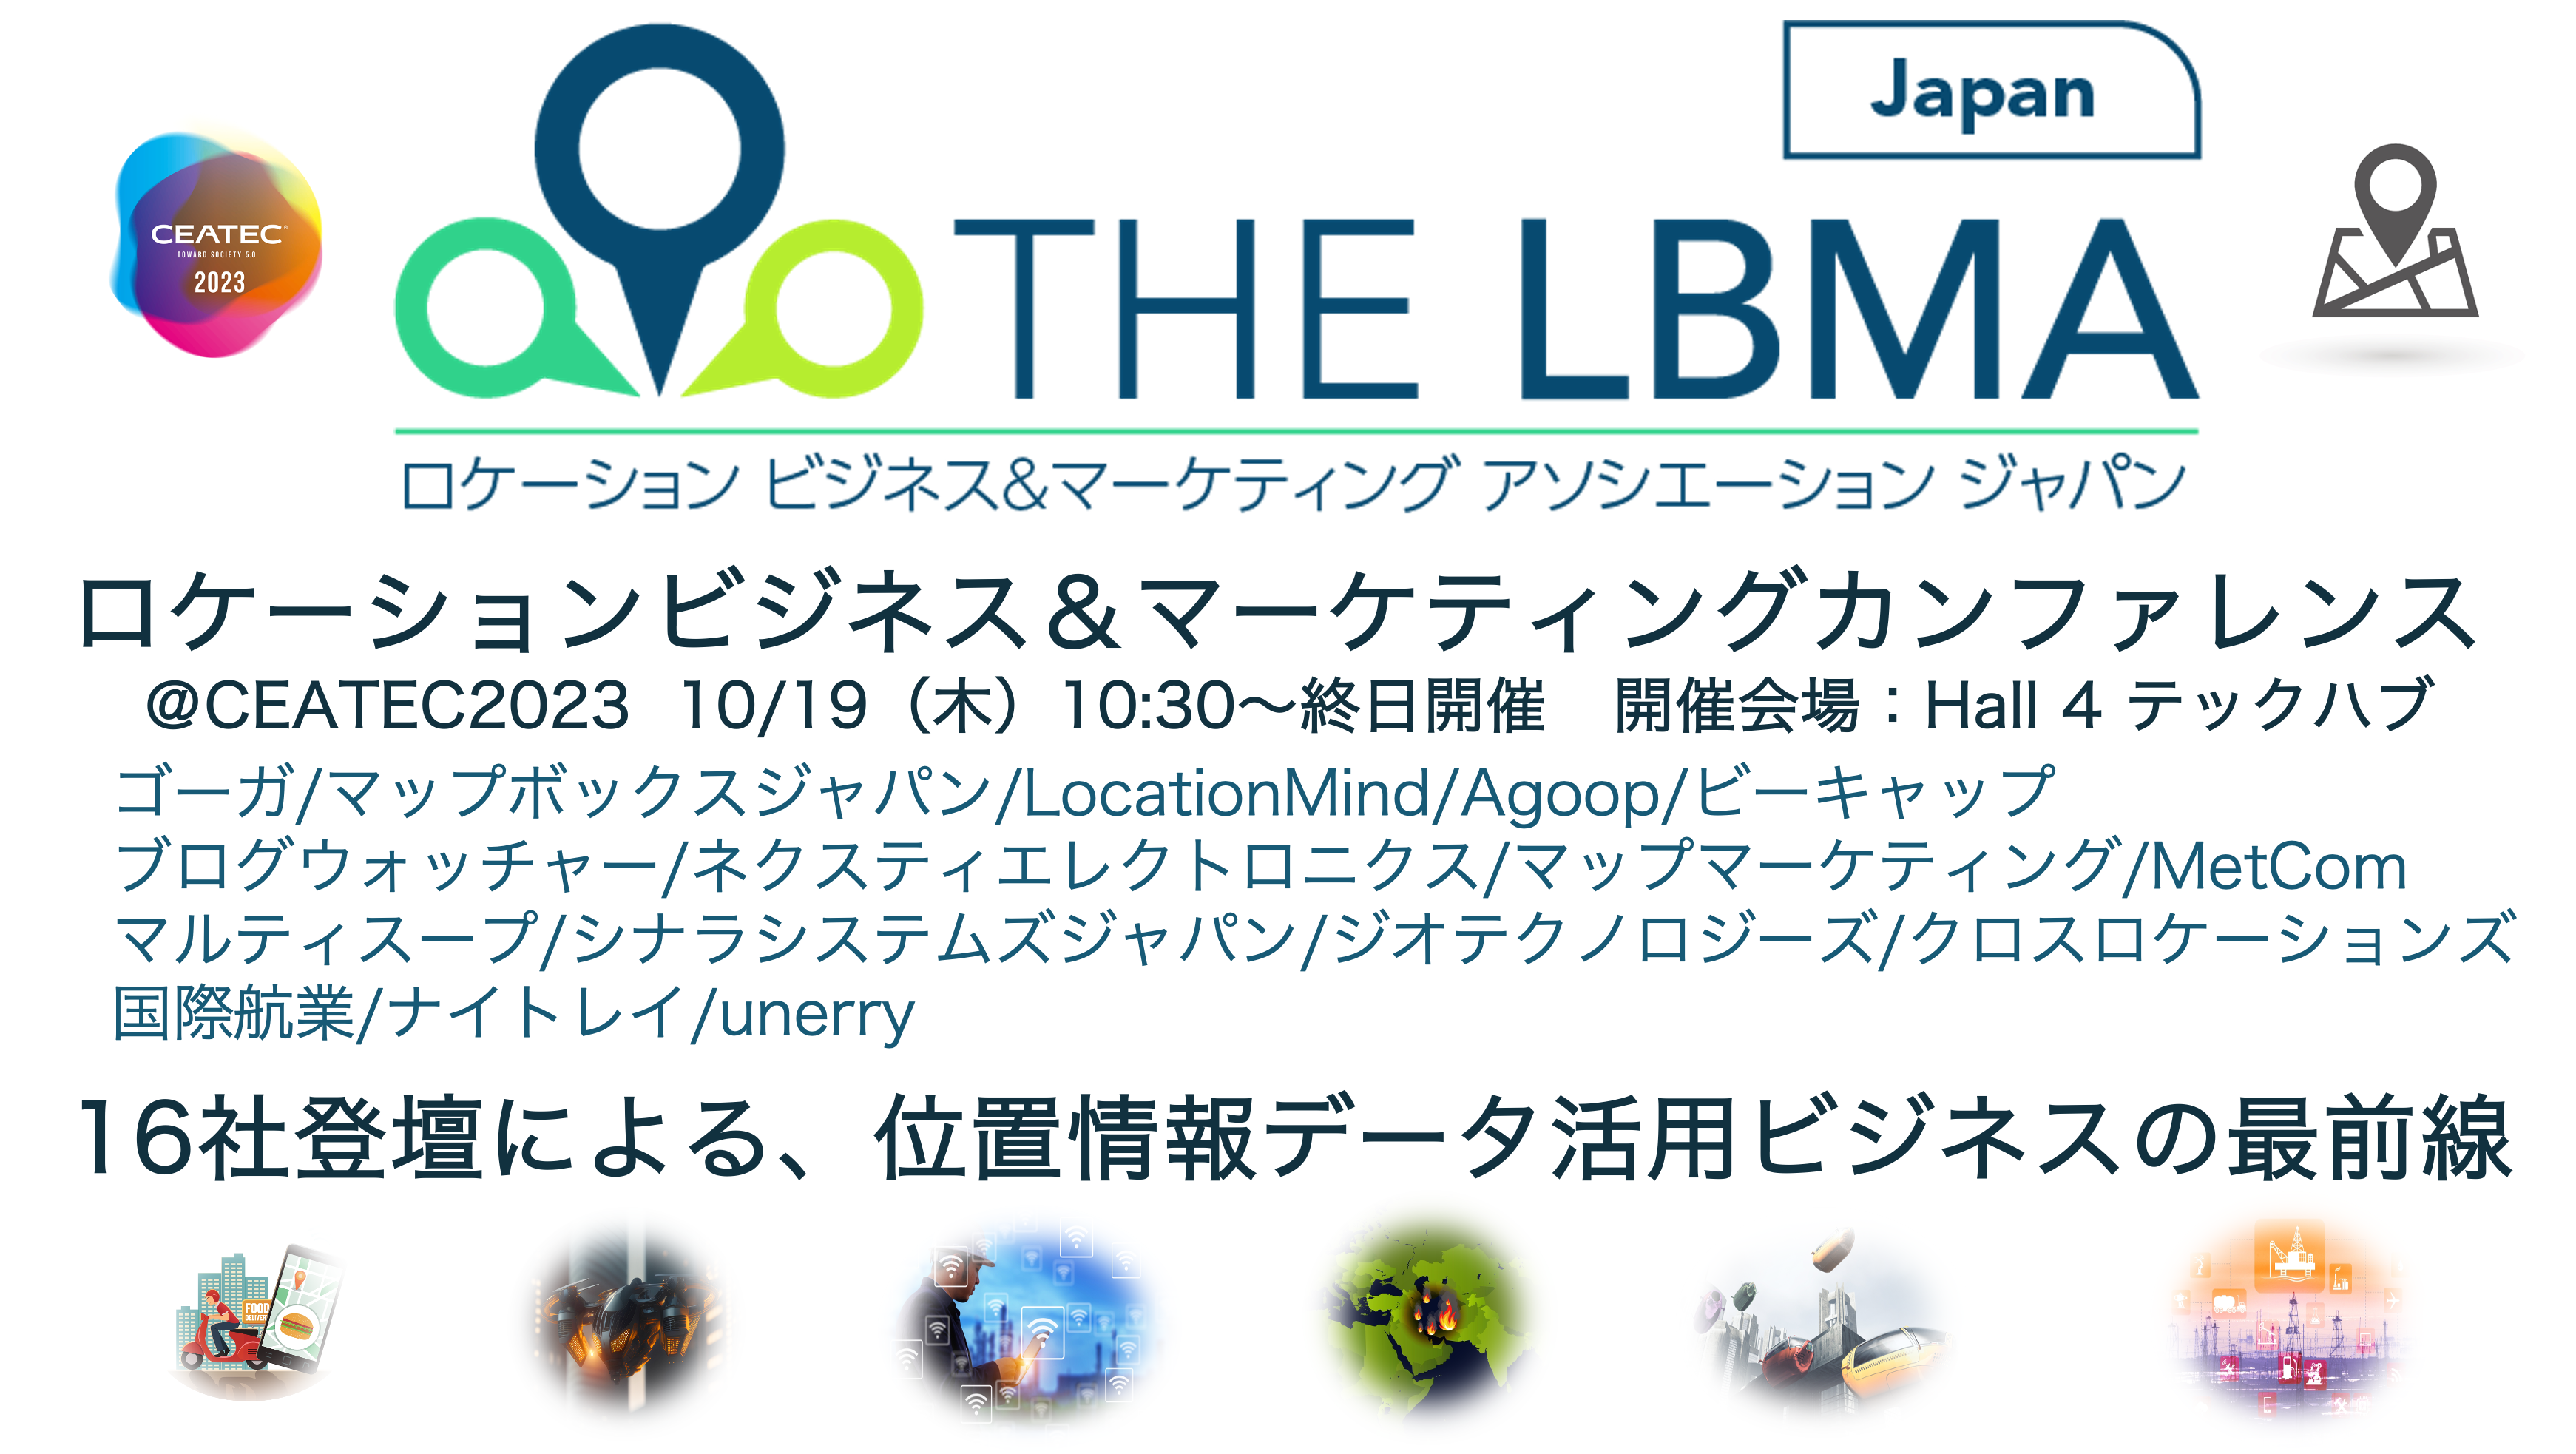 Powered by LBMA Japan